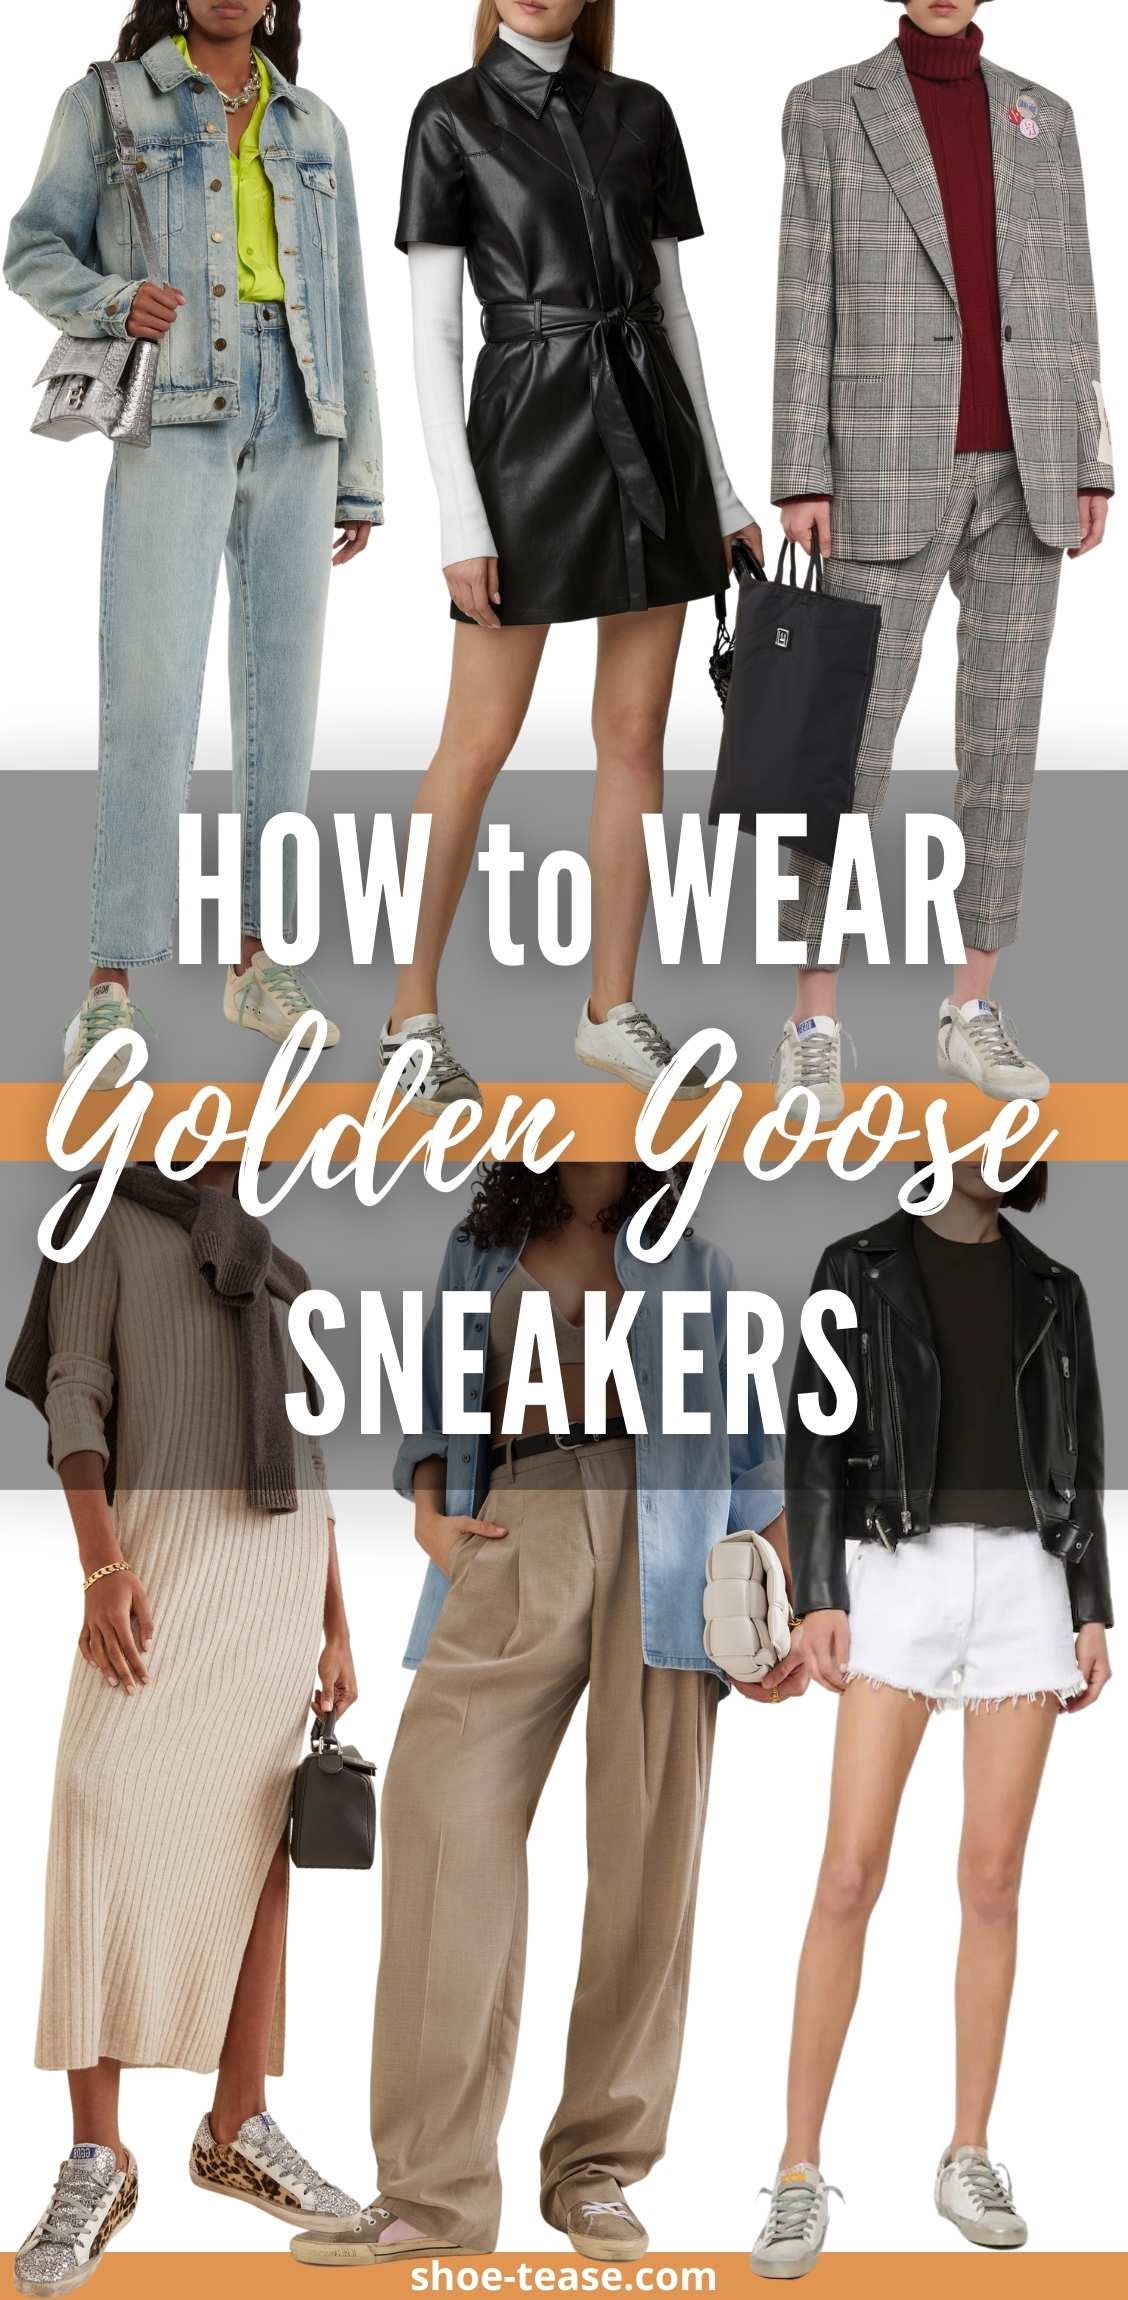 Collage with text reading how to wear golden goose sneakers over 6 women wearing different golden goose sneakers outfits.